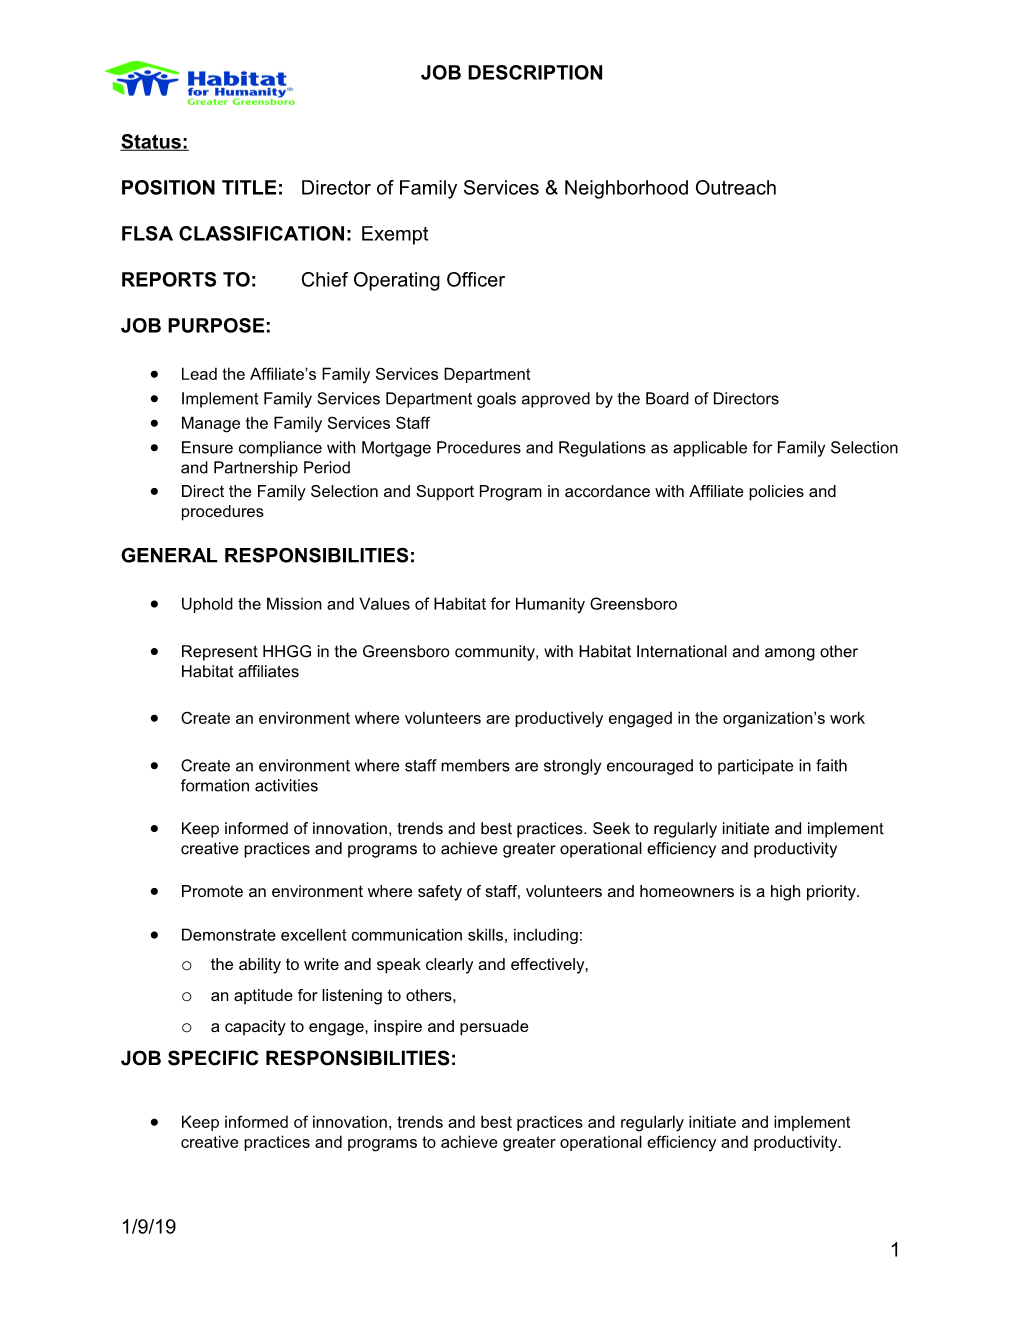 POSITION TITLE:Director of Family Services & Neighborhood Outreach